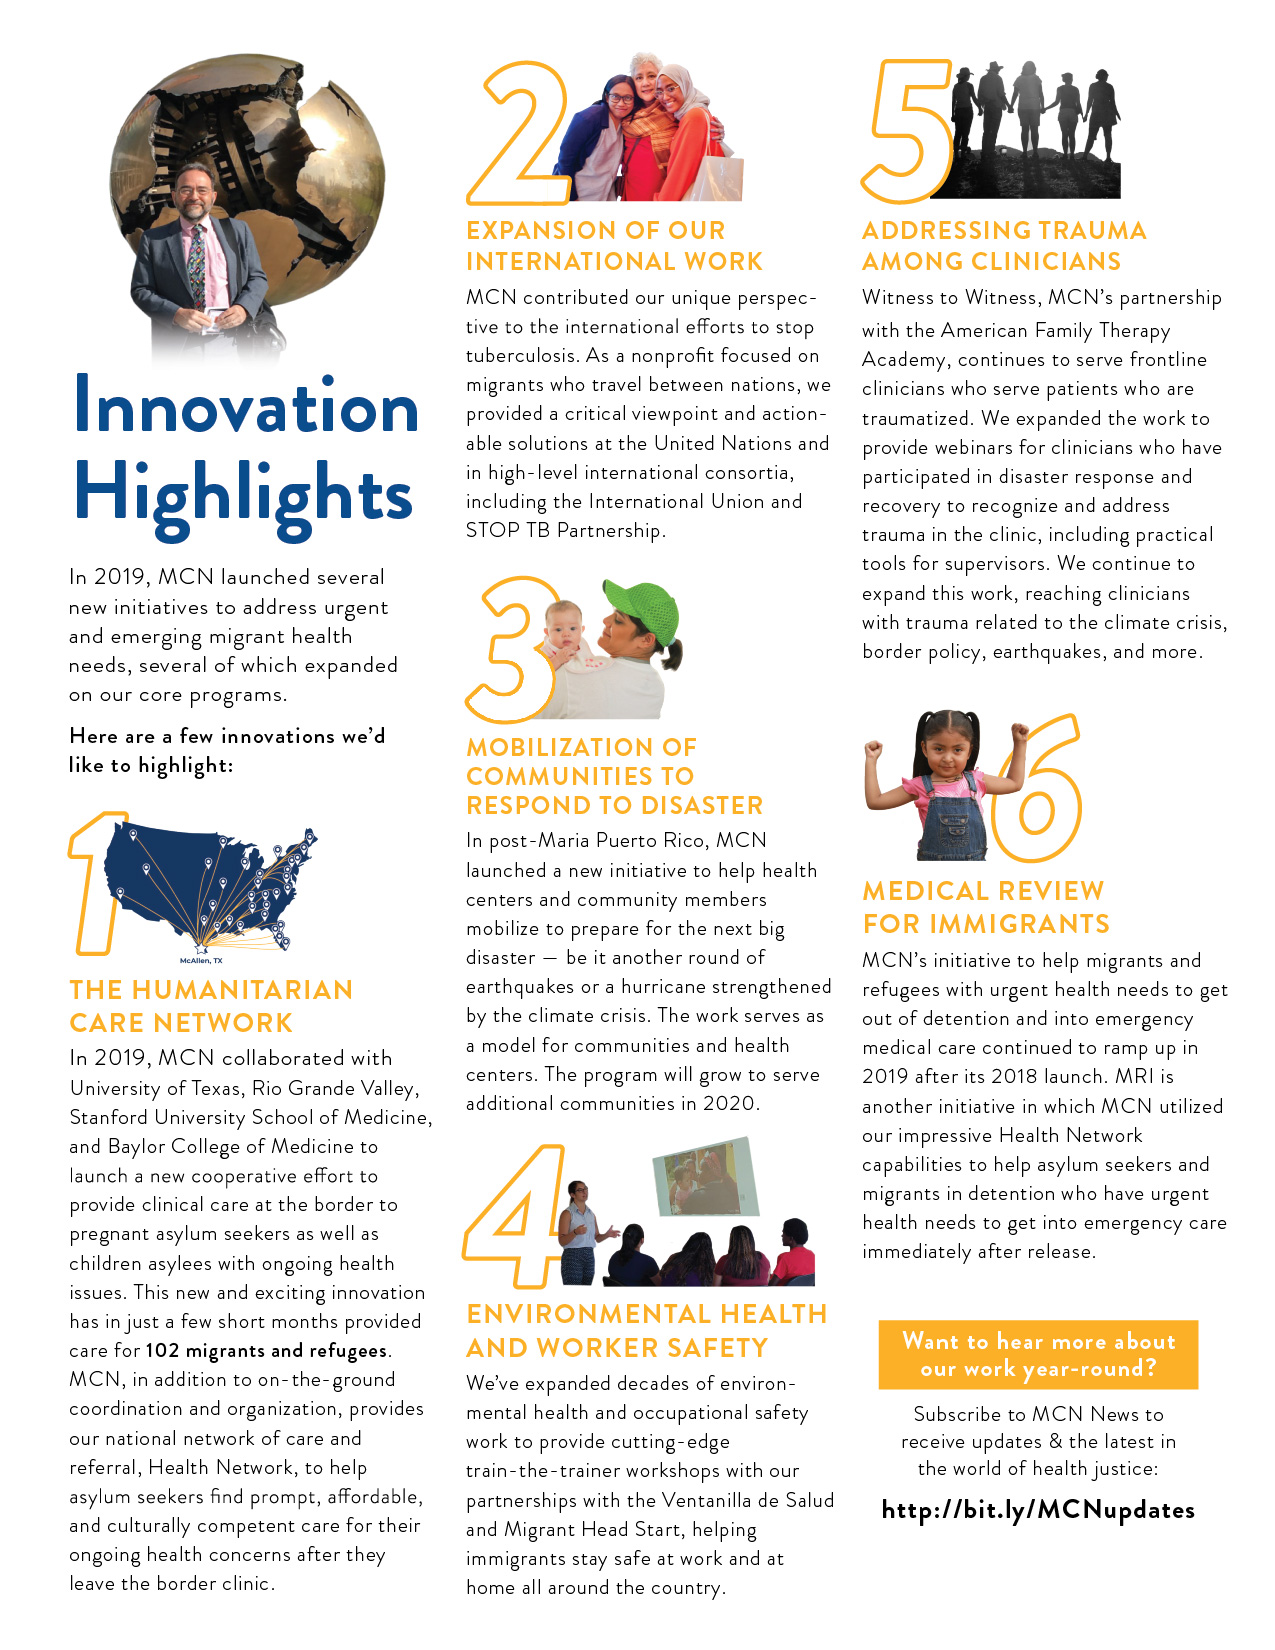 The Innovation Highlights page of the 2019 Year in Review